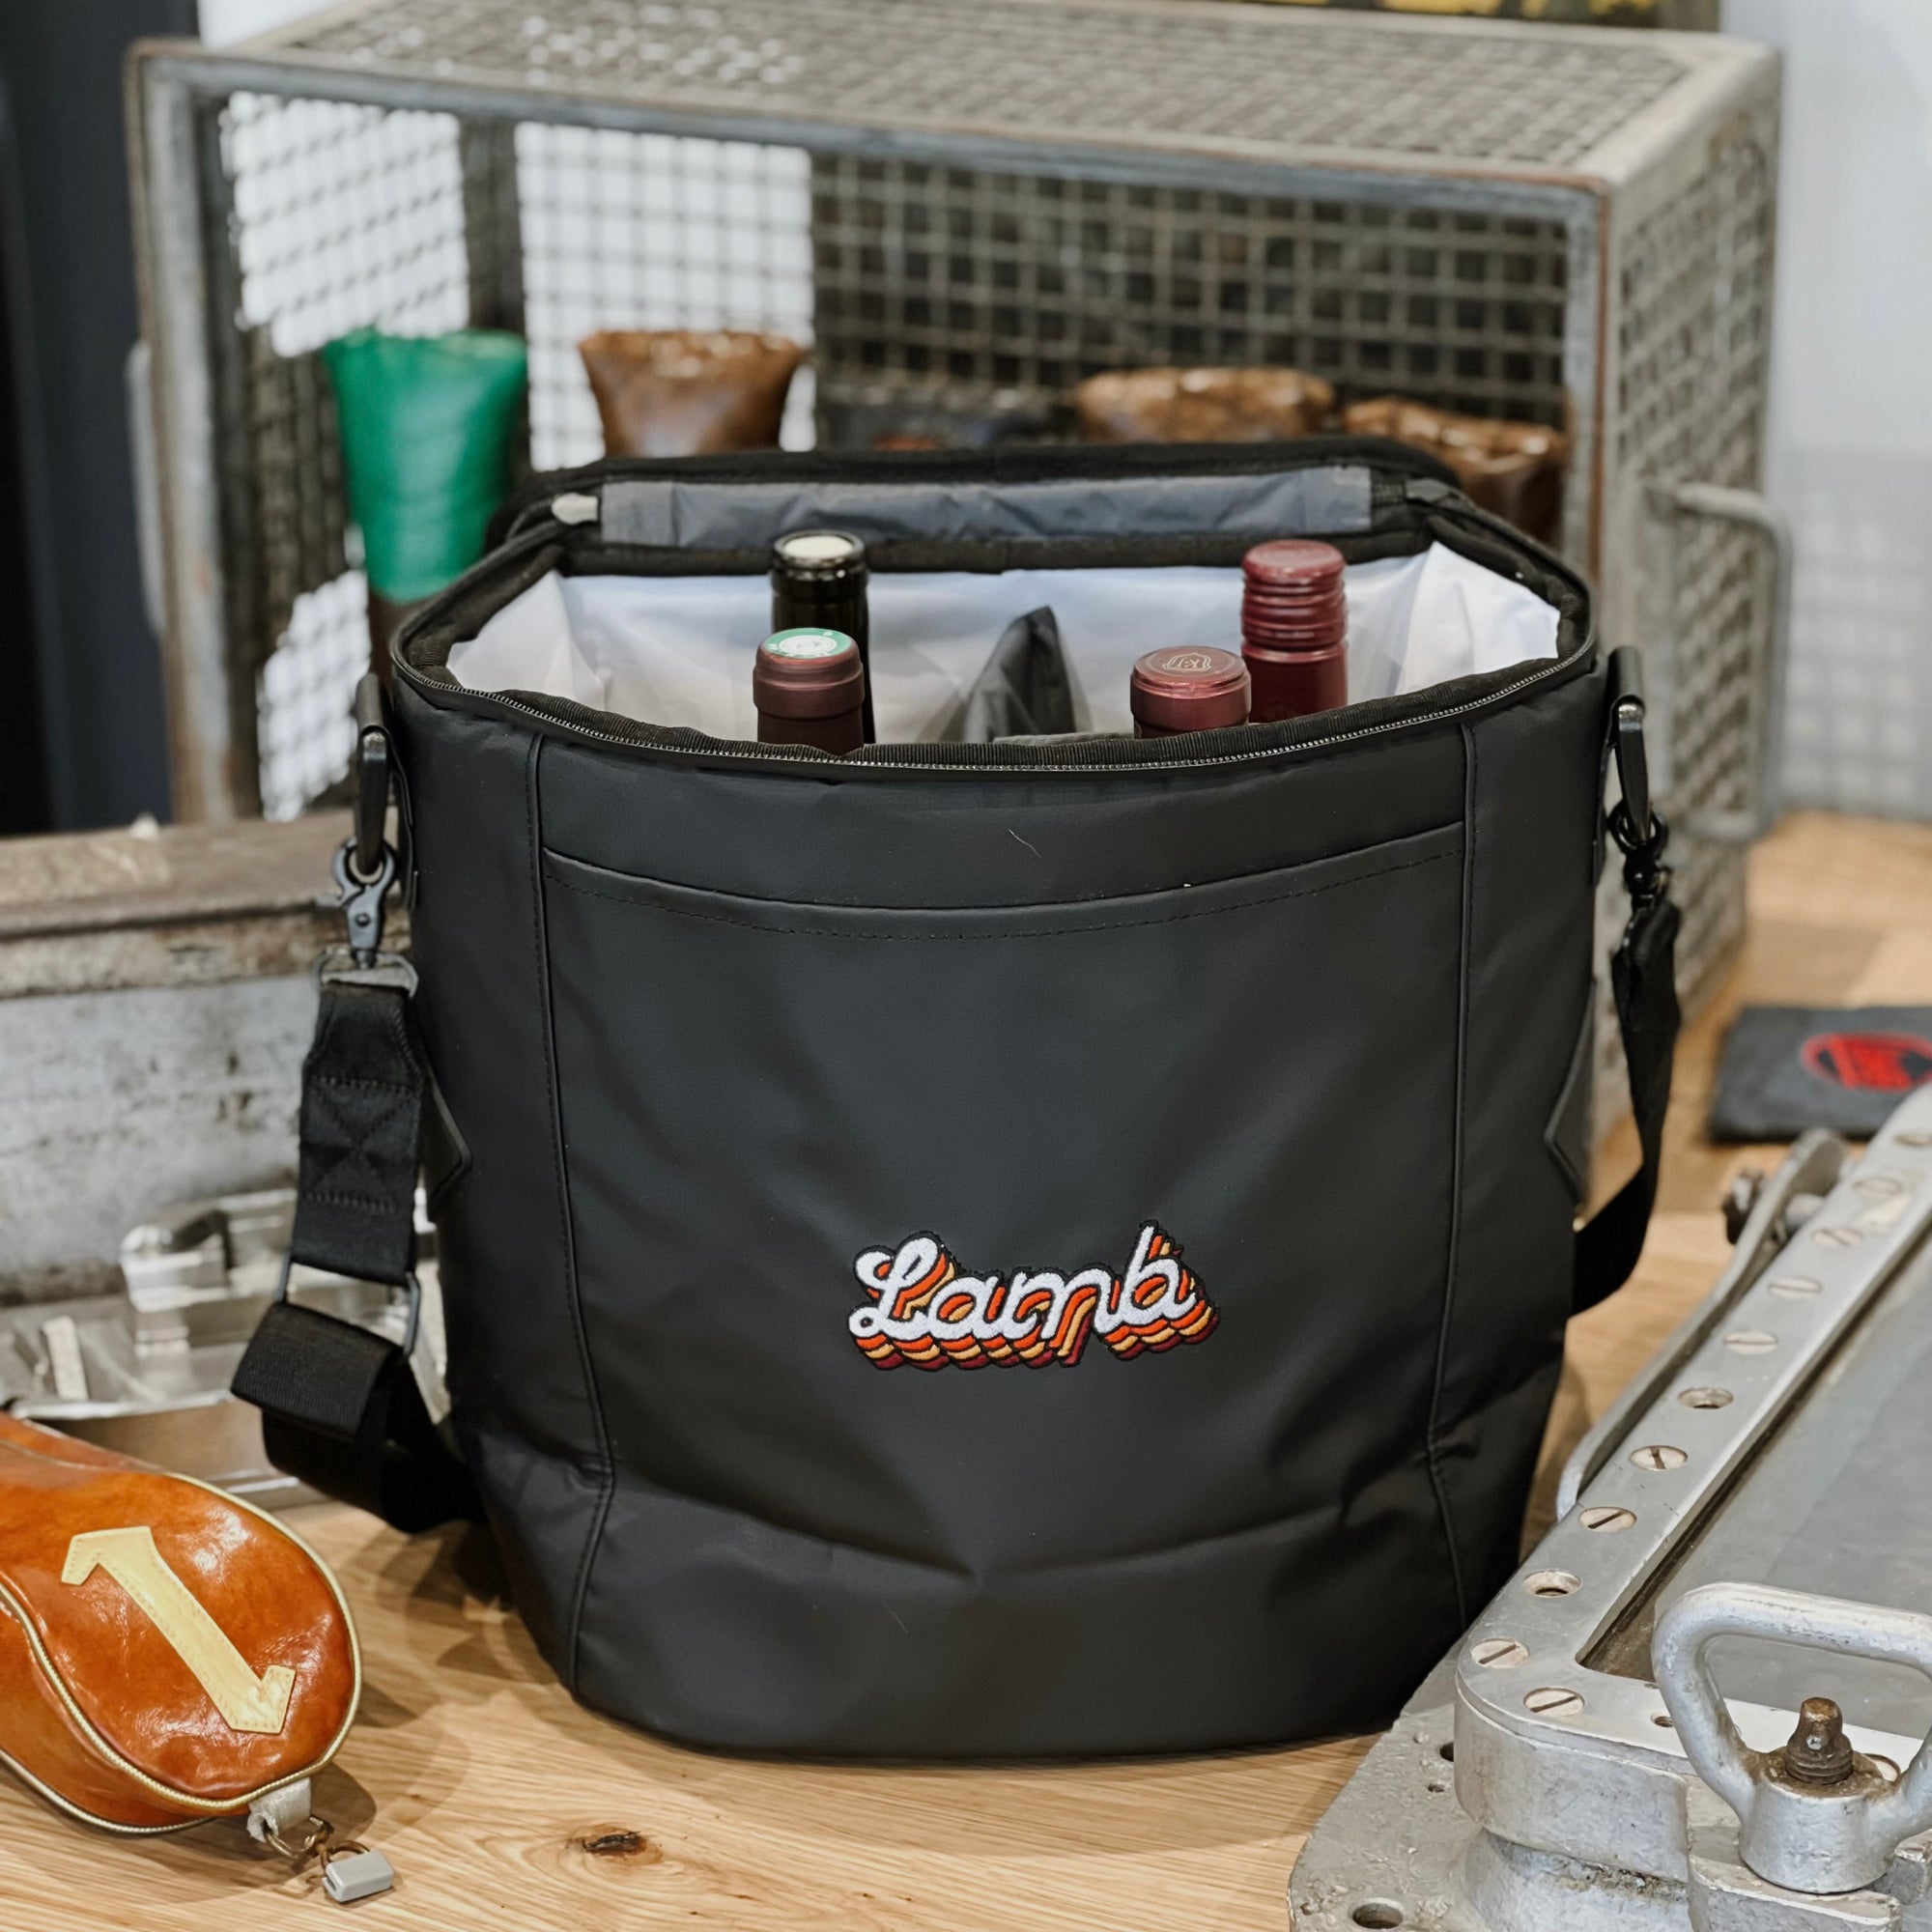 Lamb Crafted Cooler/Wine Carrier - Black